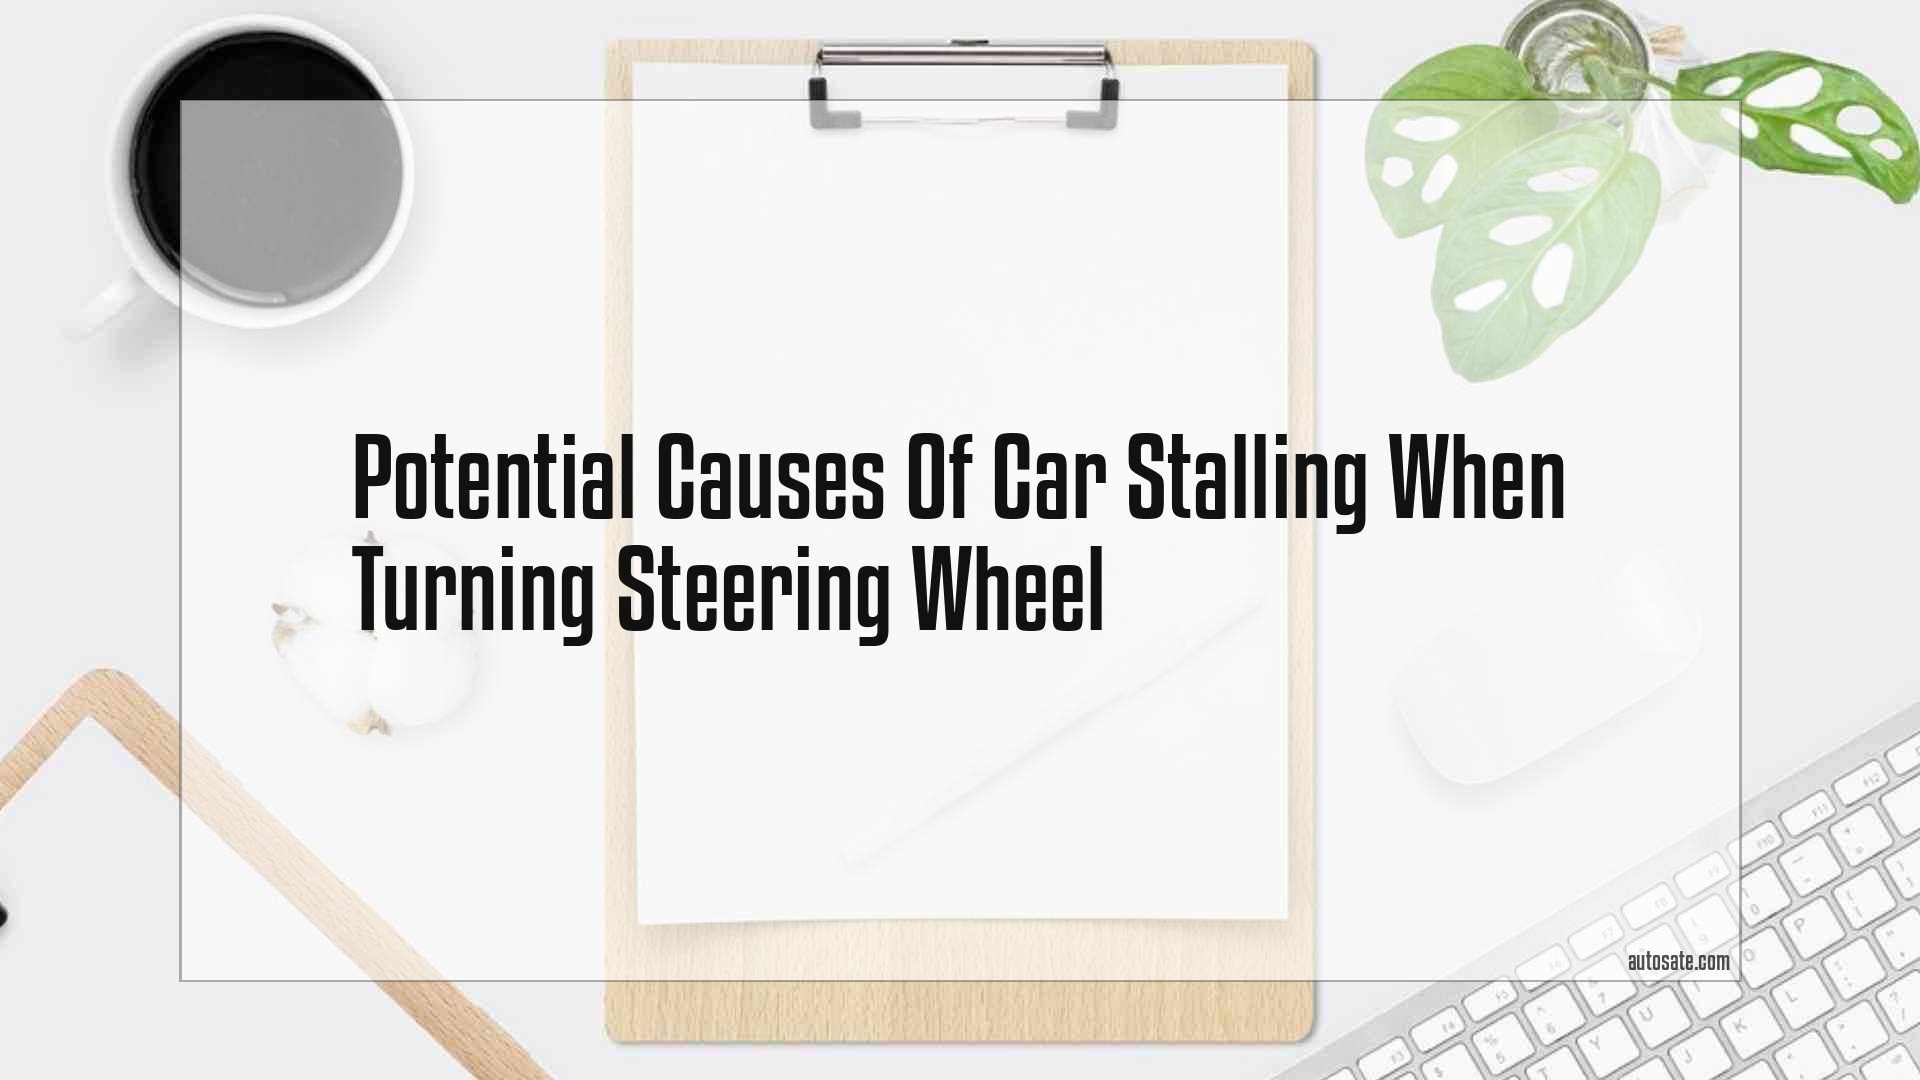 Potential Causes Of Car Stalling When Turning Steering Wheel